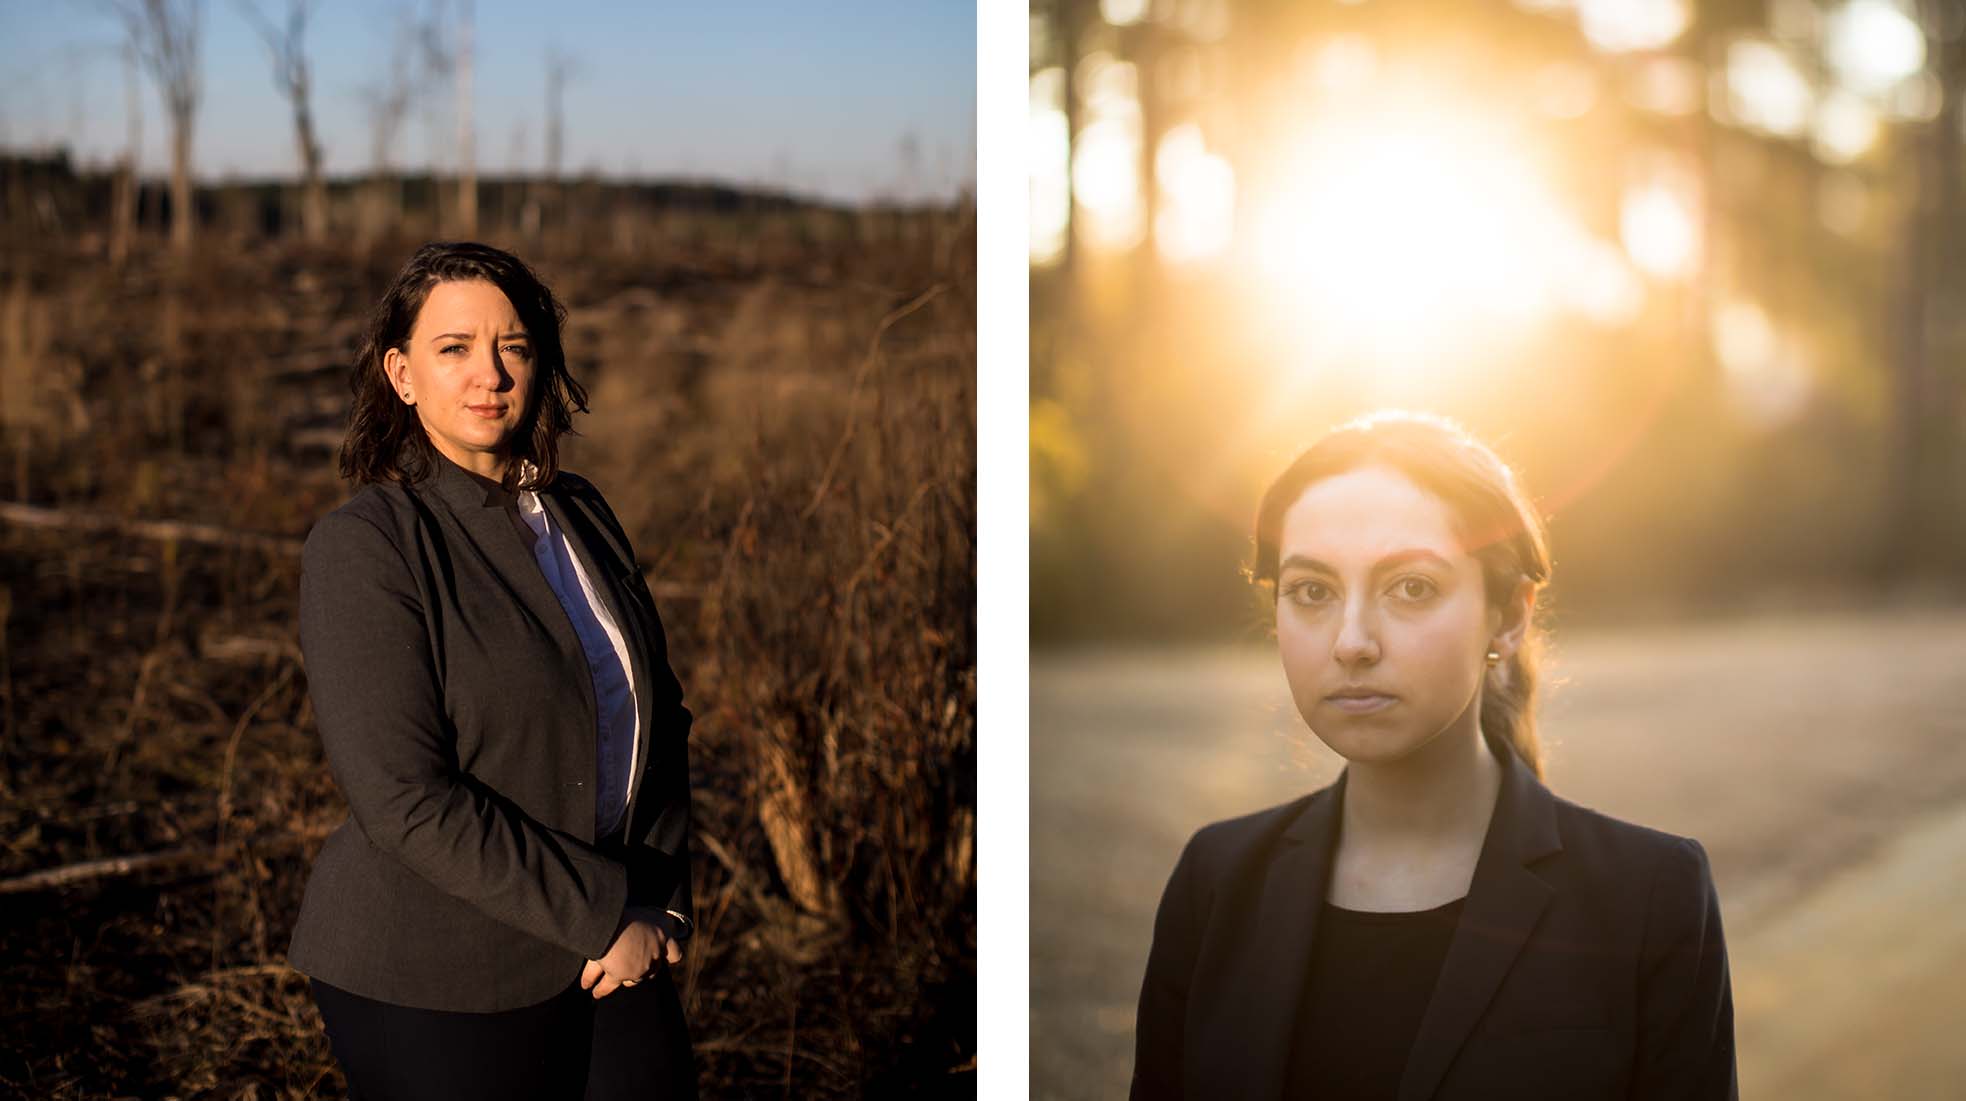 Loyola law students Samantha Schatko, left, and Patricia Martin came up with the idea of a week-long student immersion experience in immigration law, which led to them form a group to travel to a rural area of Louisiana during their spring break.